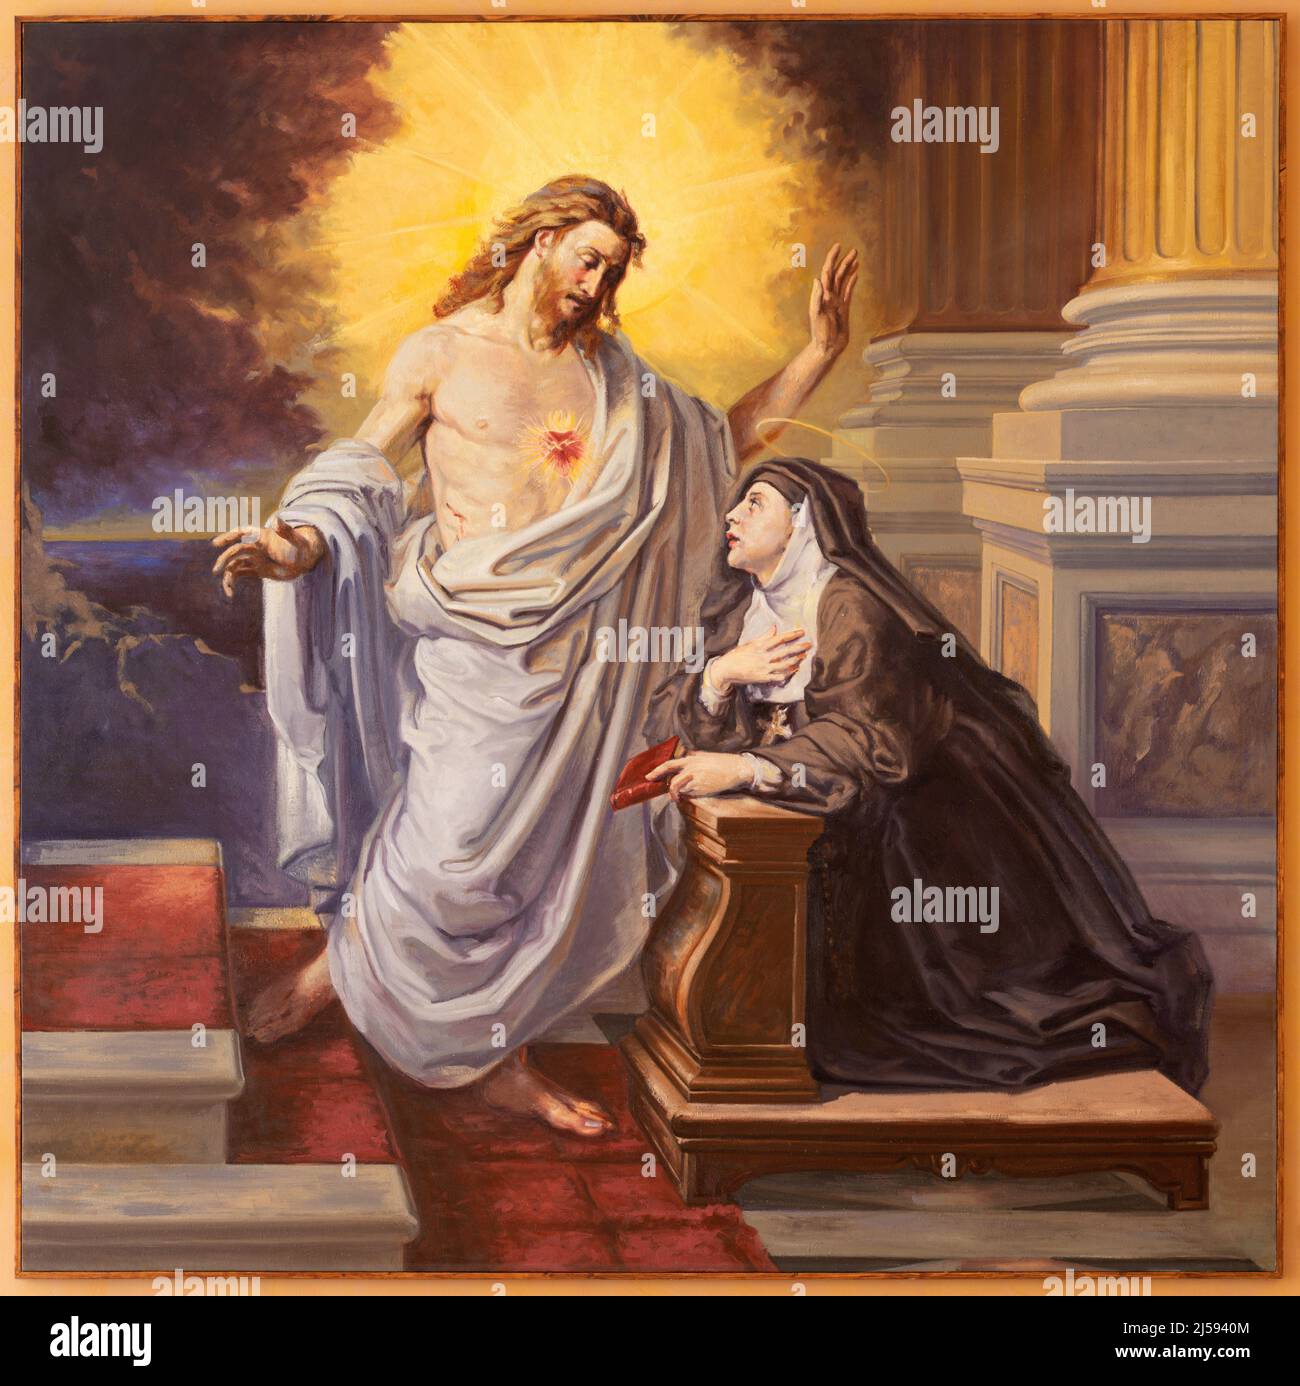 BARI, ITALY - MARCH 3, 2022: The painting of apparition of Heart Jesus to St. Theresa of Avila in the church Chiesa di Sacro Cuore from 20. cent. Stock Photo